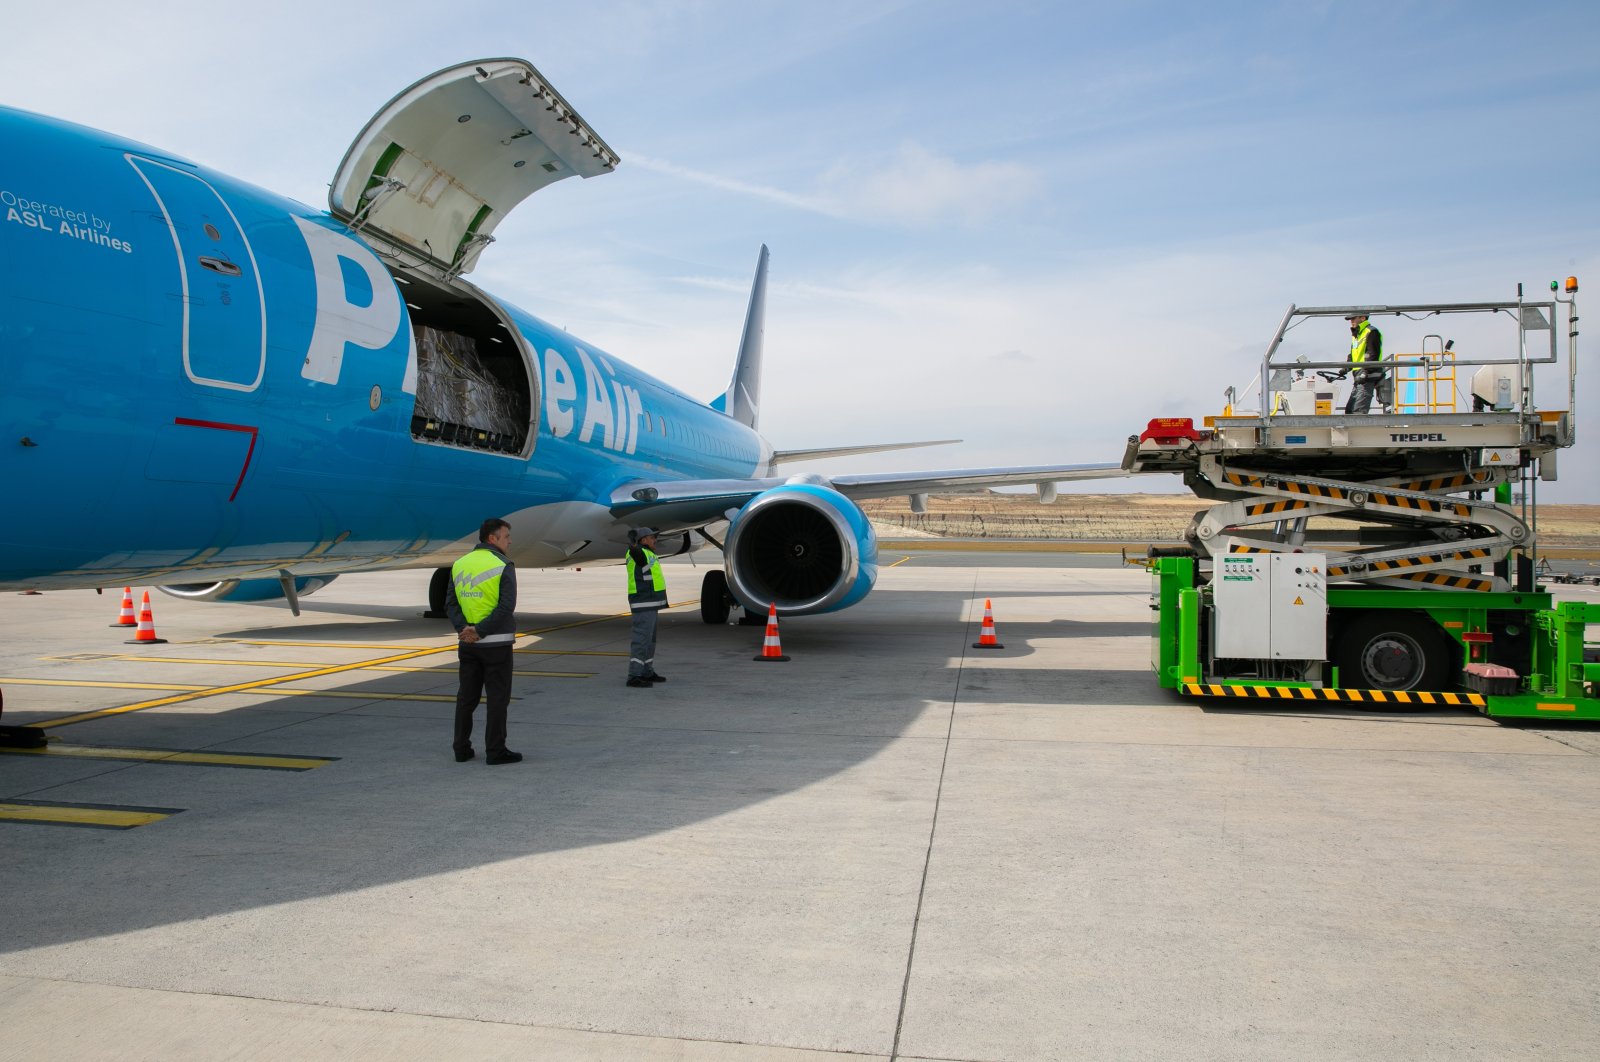 An Amazon Air cargo plane is being loaded with disaster relief supplies in an unspecified location. (Courtesy of Amazon)